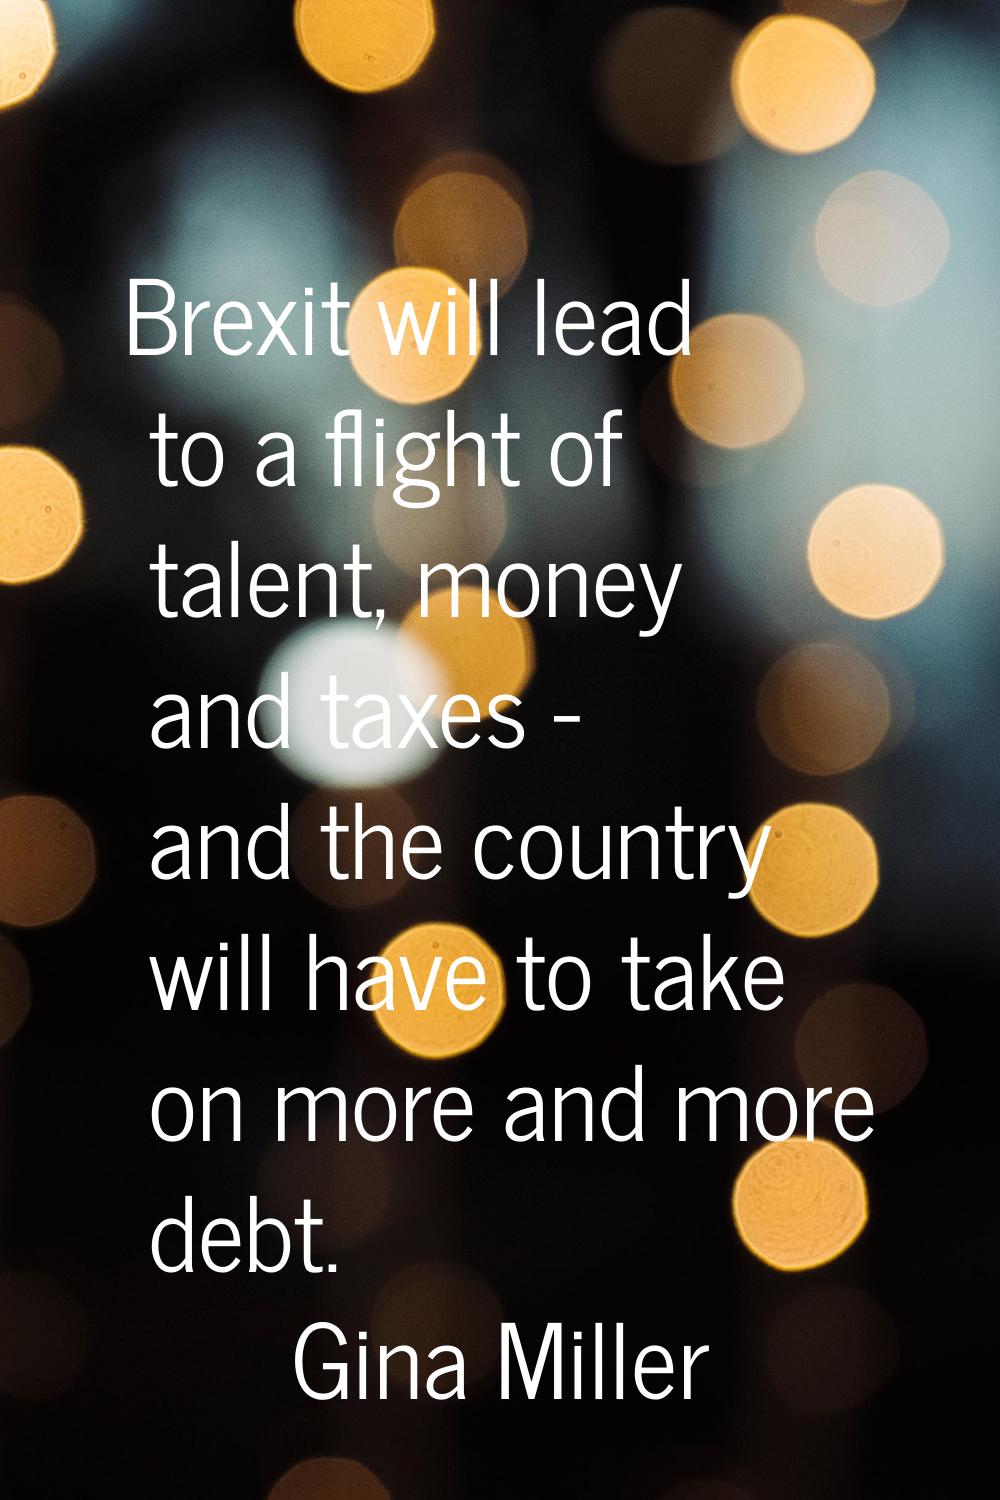 Brexit will lead to a flight of talent, money and taxes - and the country will have to take on more